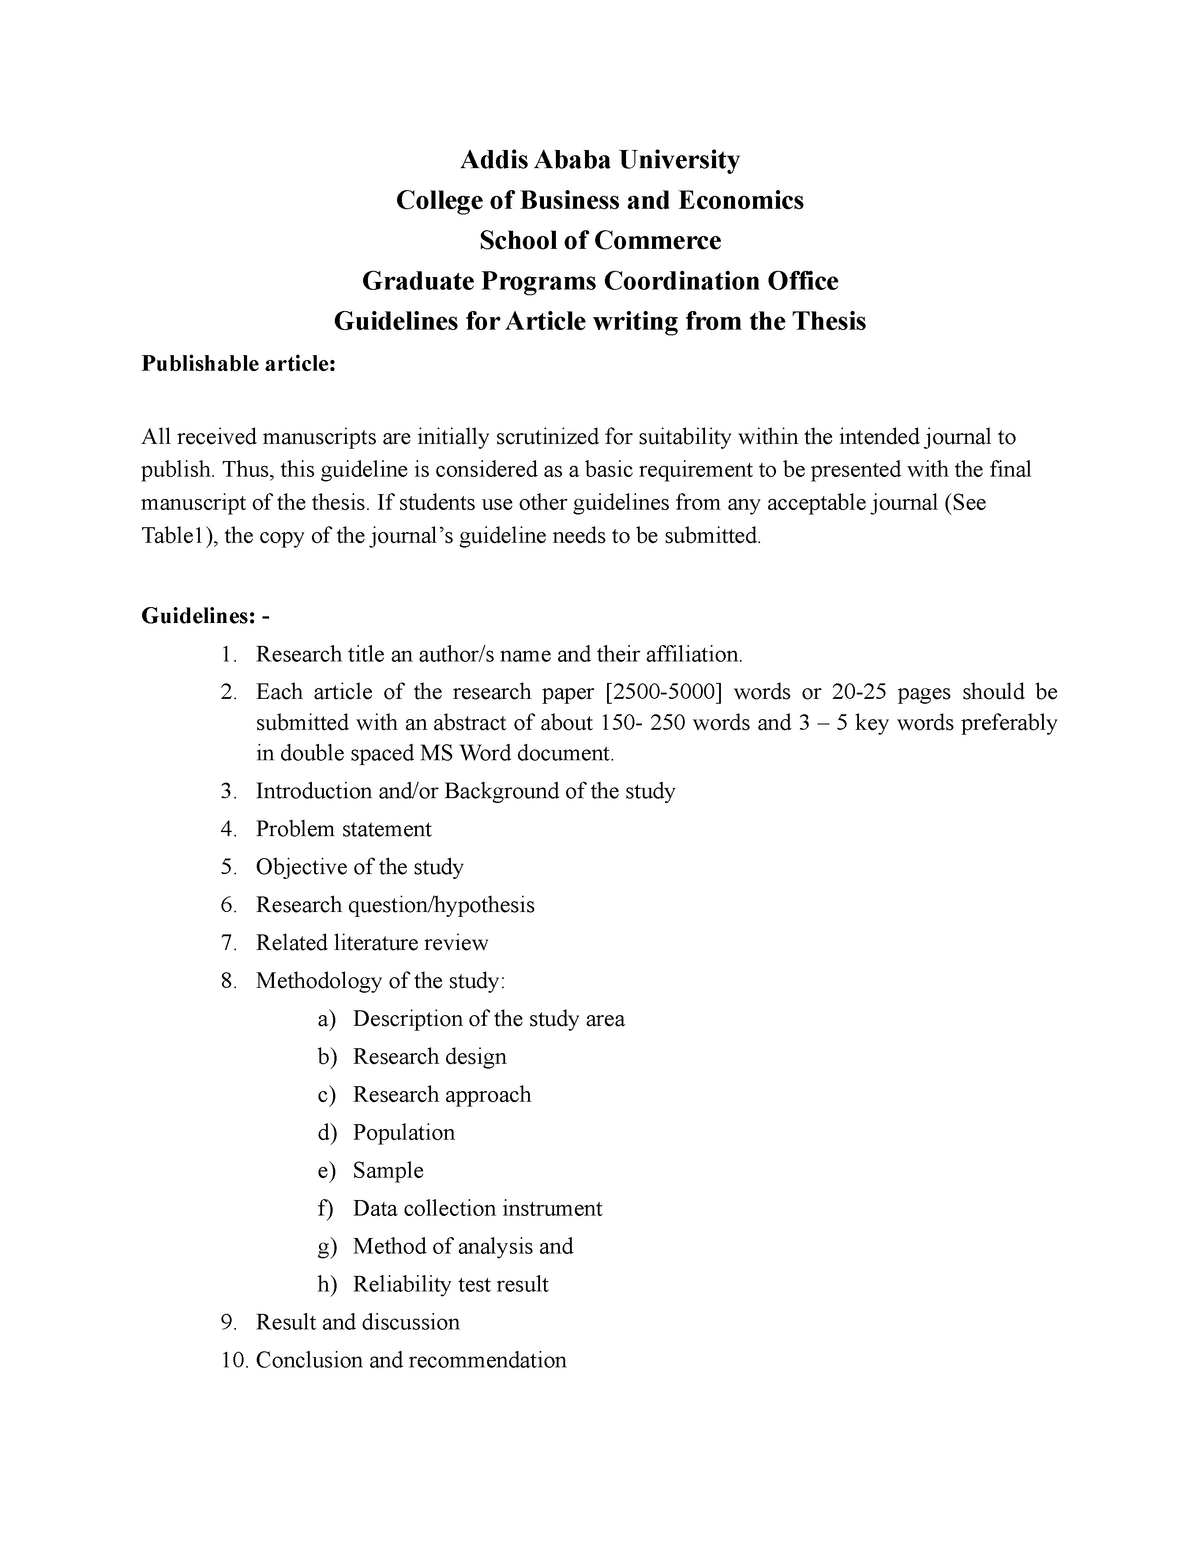 addis ababa university master's thesis guidelines